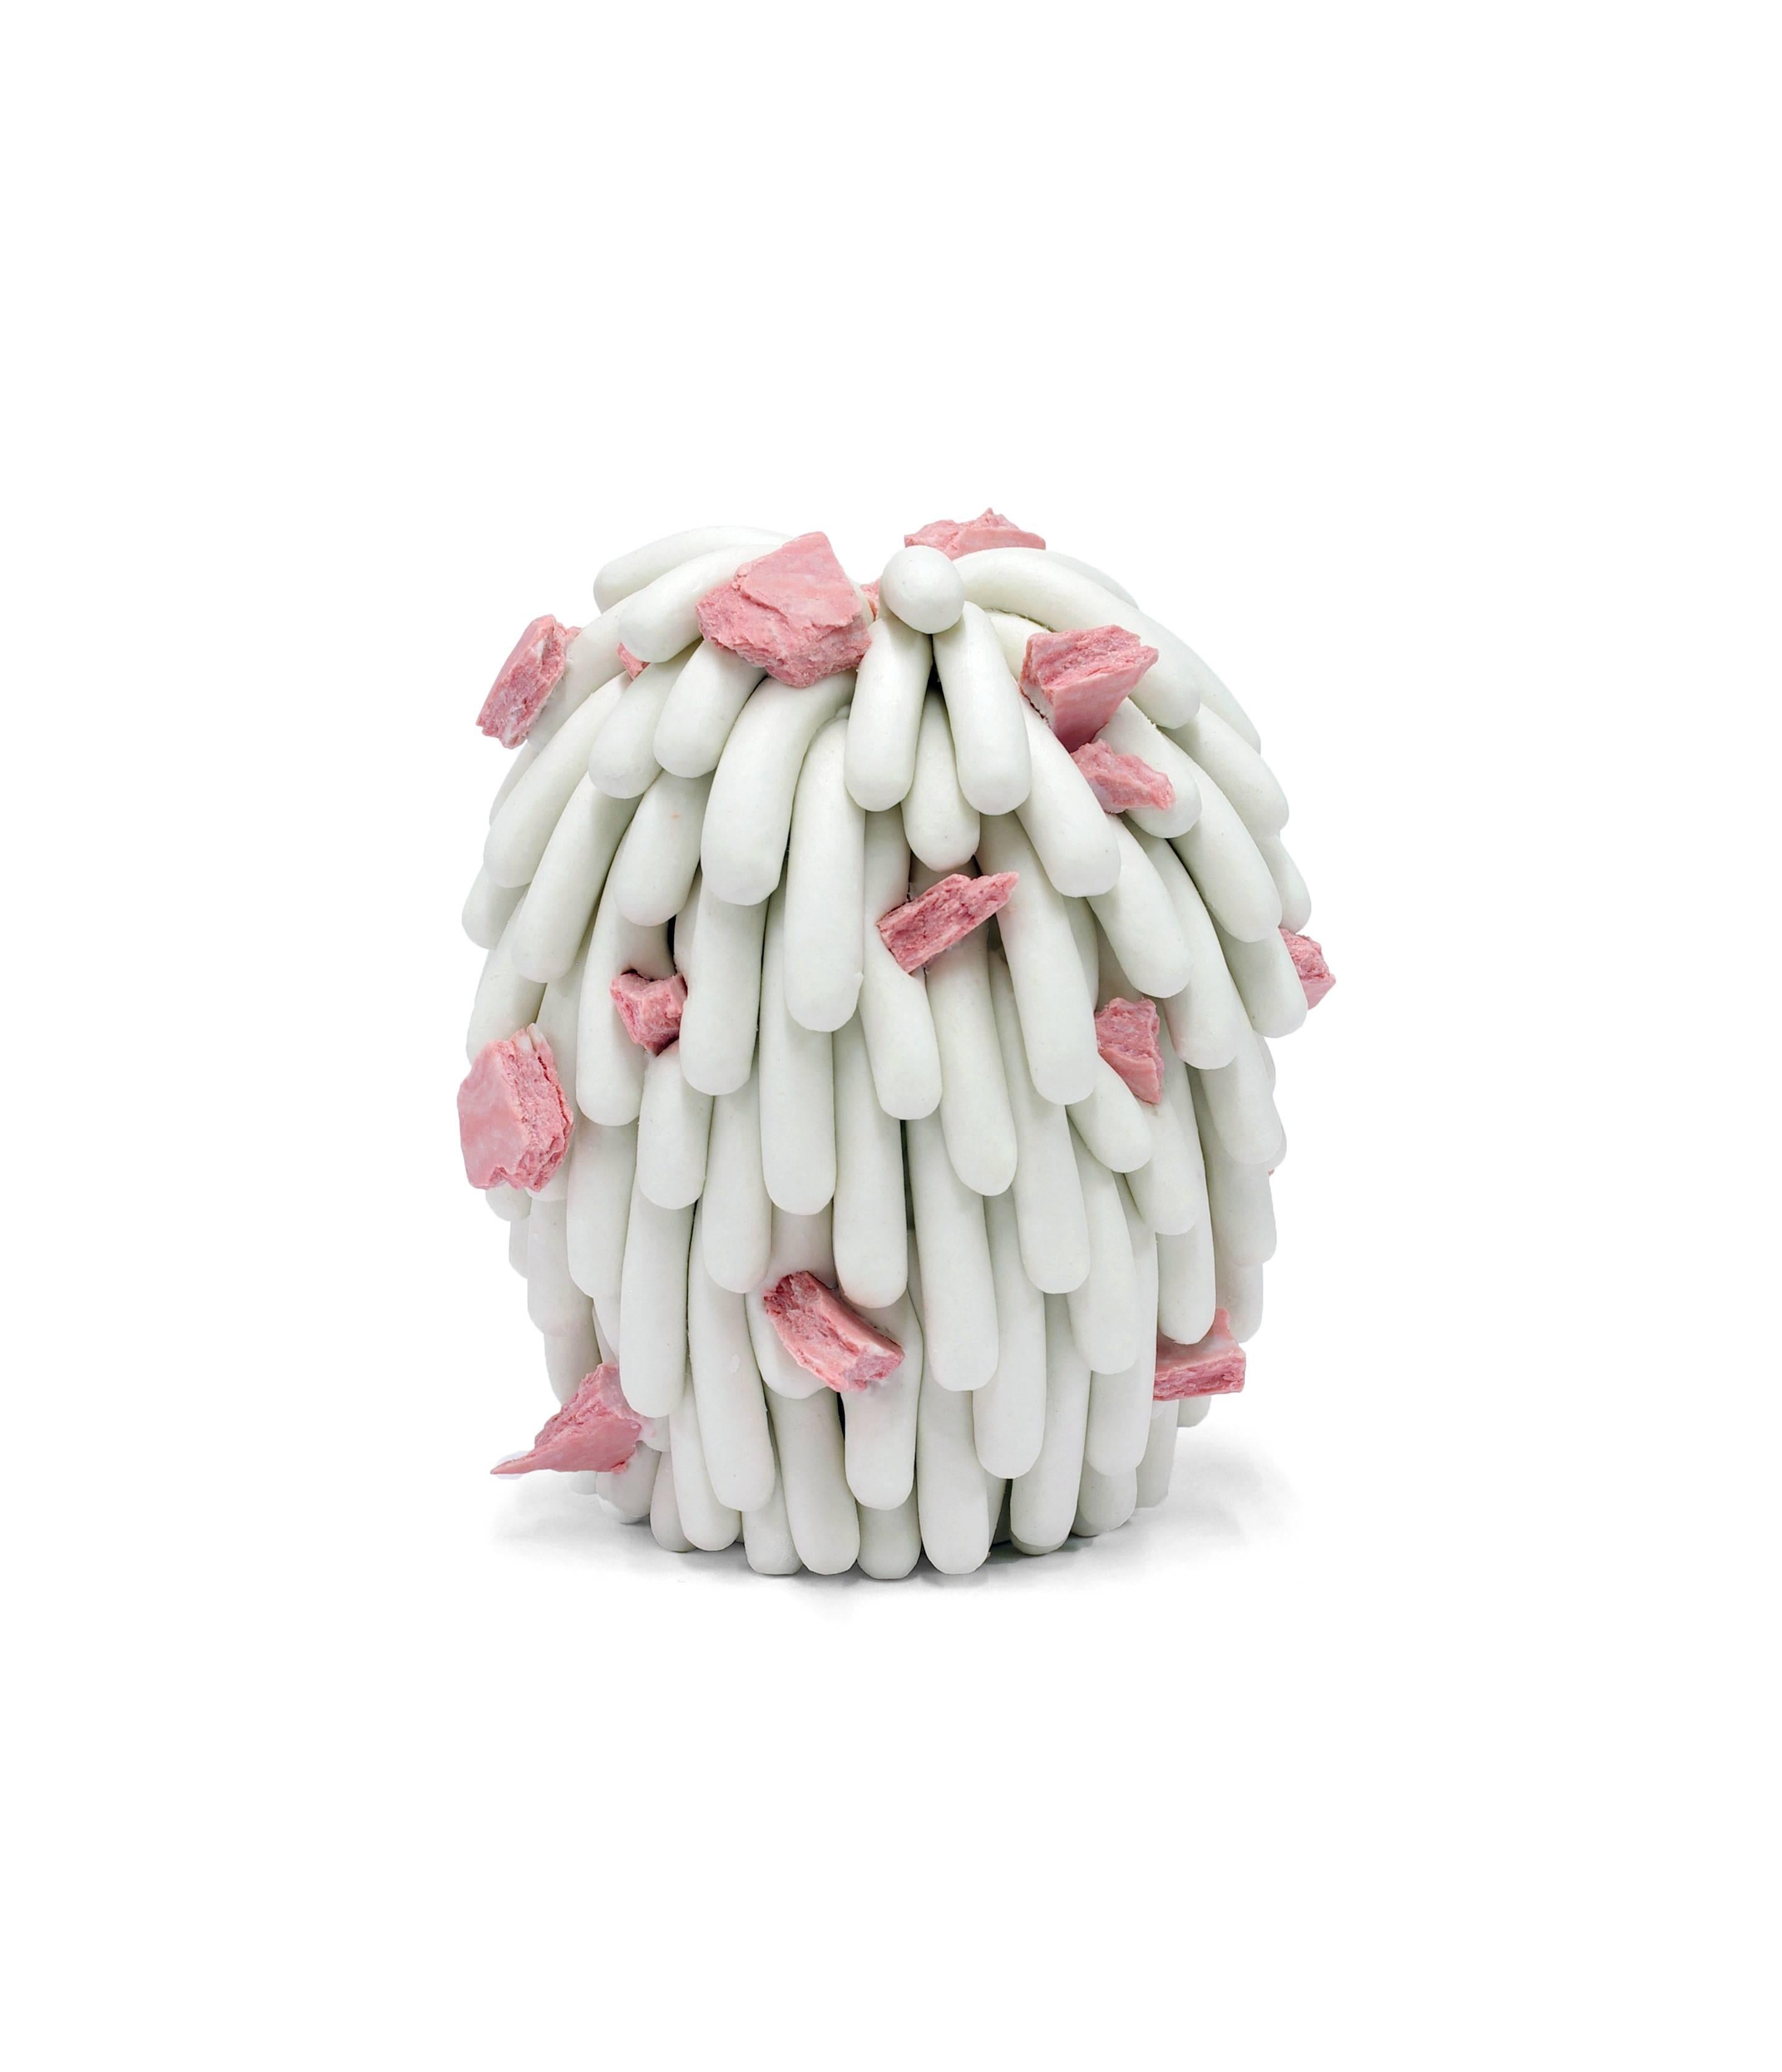 Small Porcelain Dust Furry with Pink Rocks - Sculpture by Linda Lopez